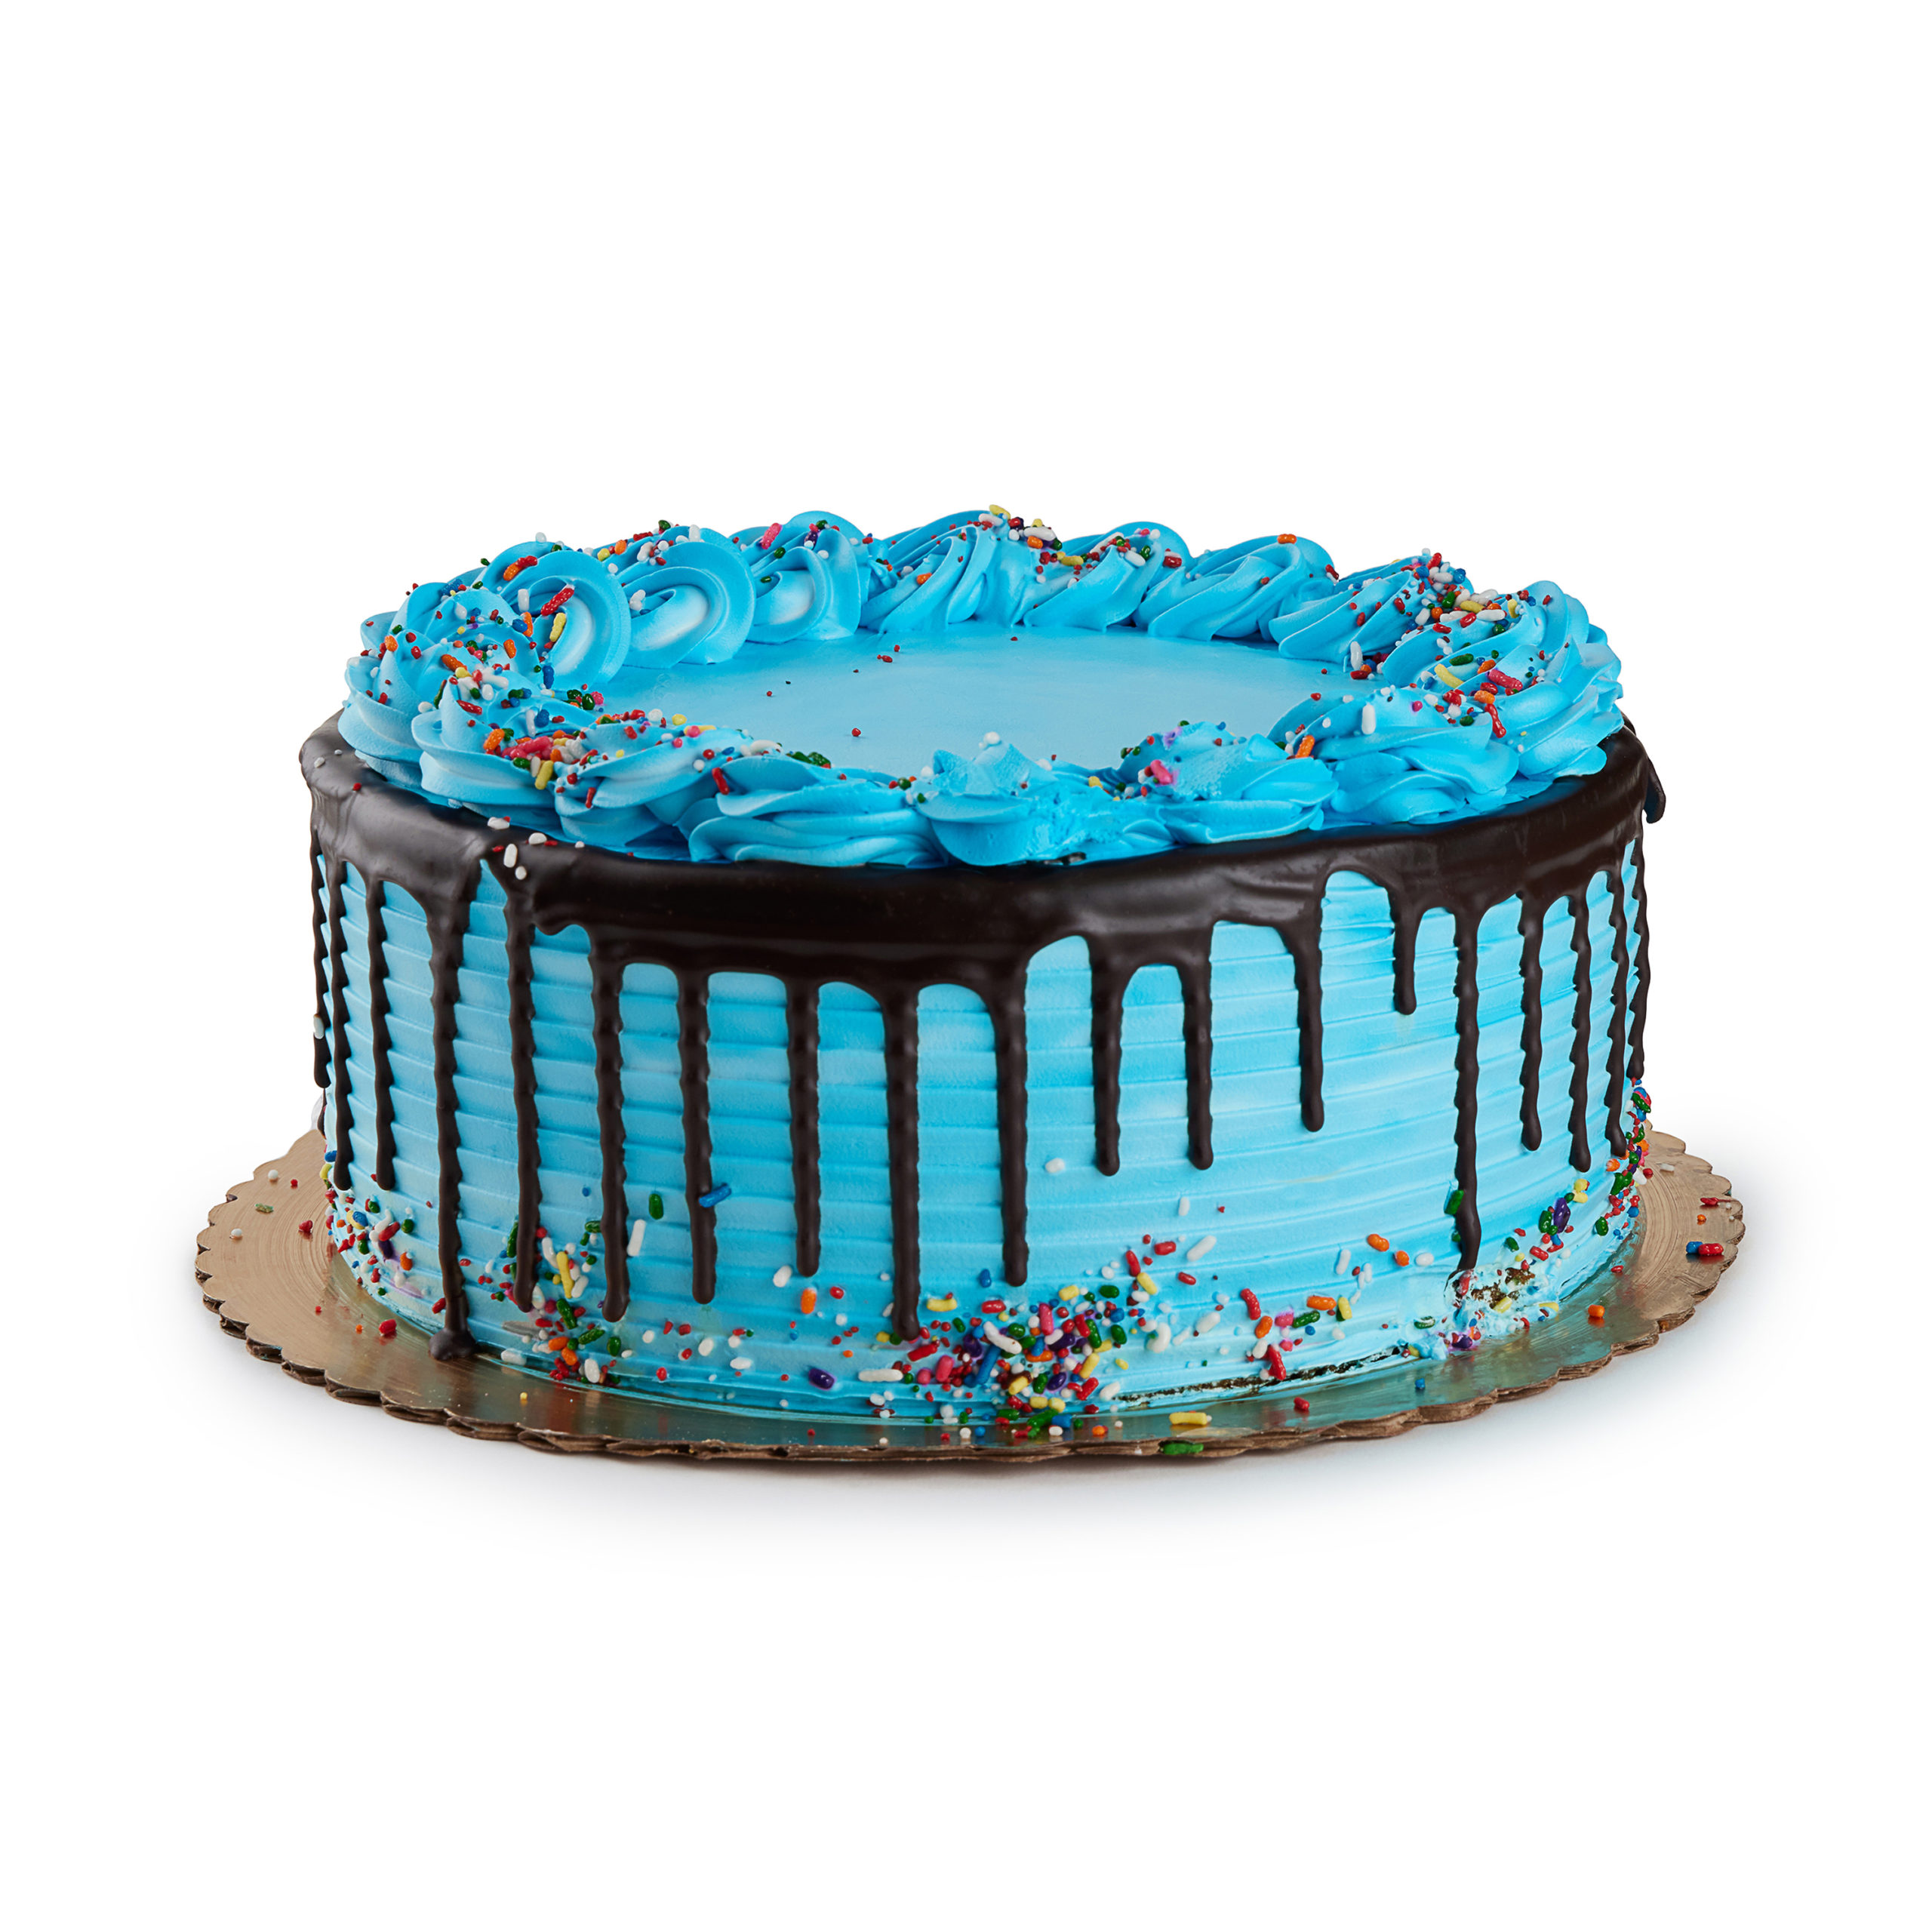 Blue Ombre Cake, Chocolate Layers | My Kitchen Stories